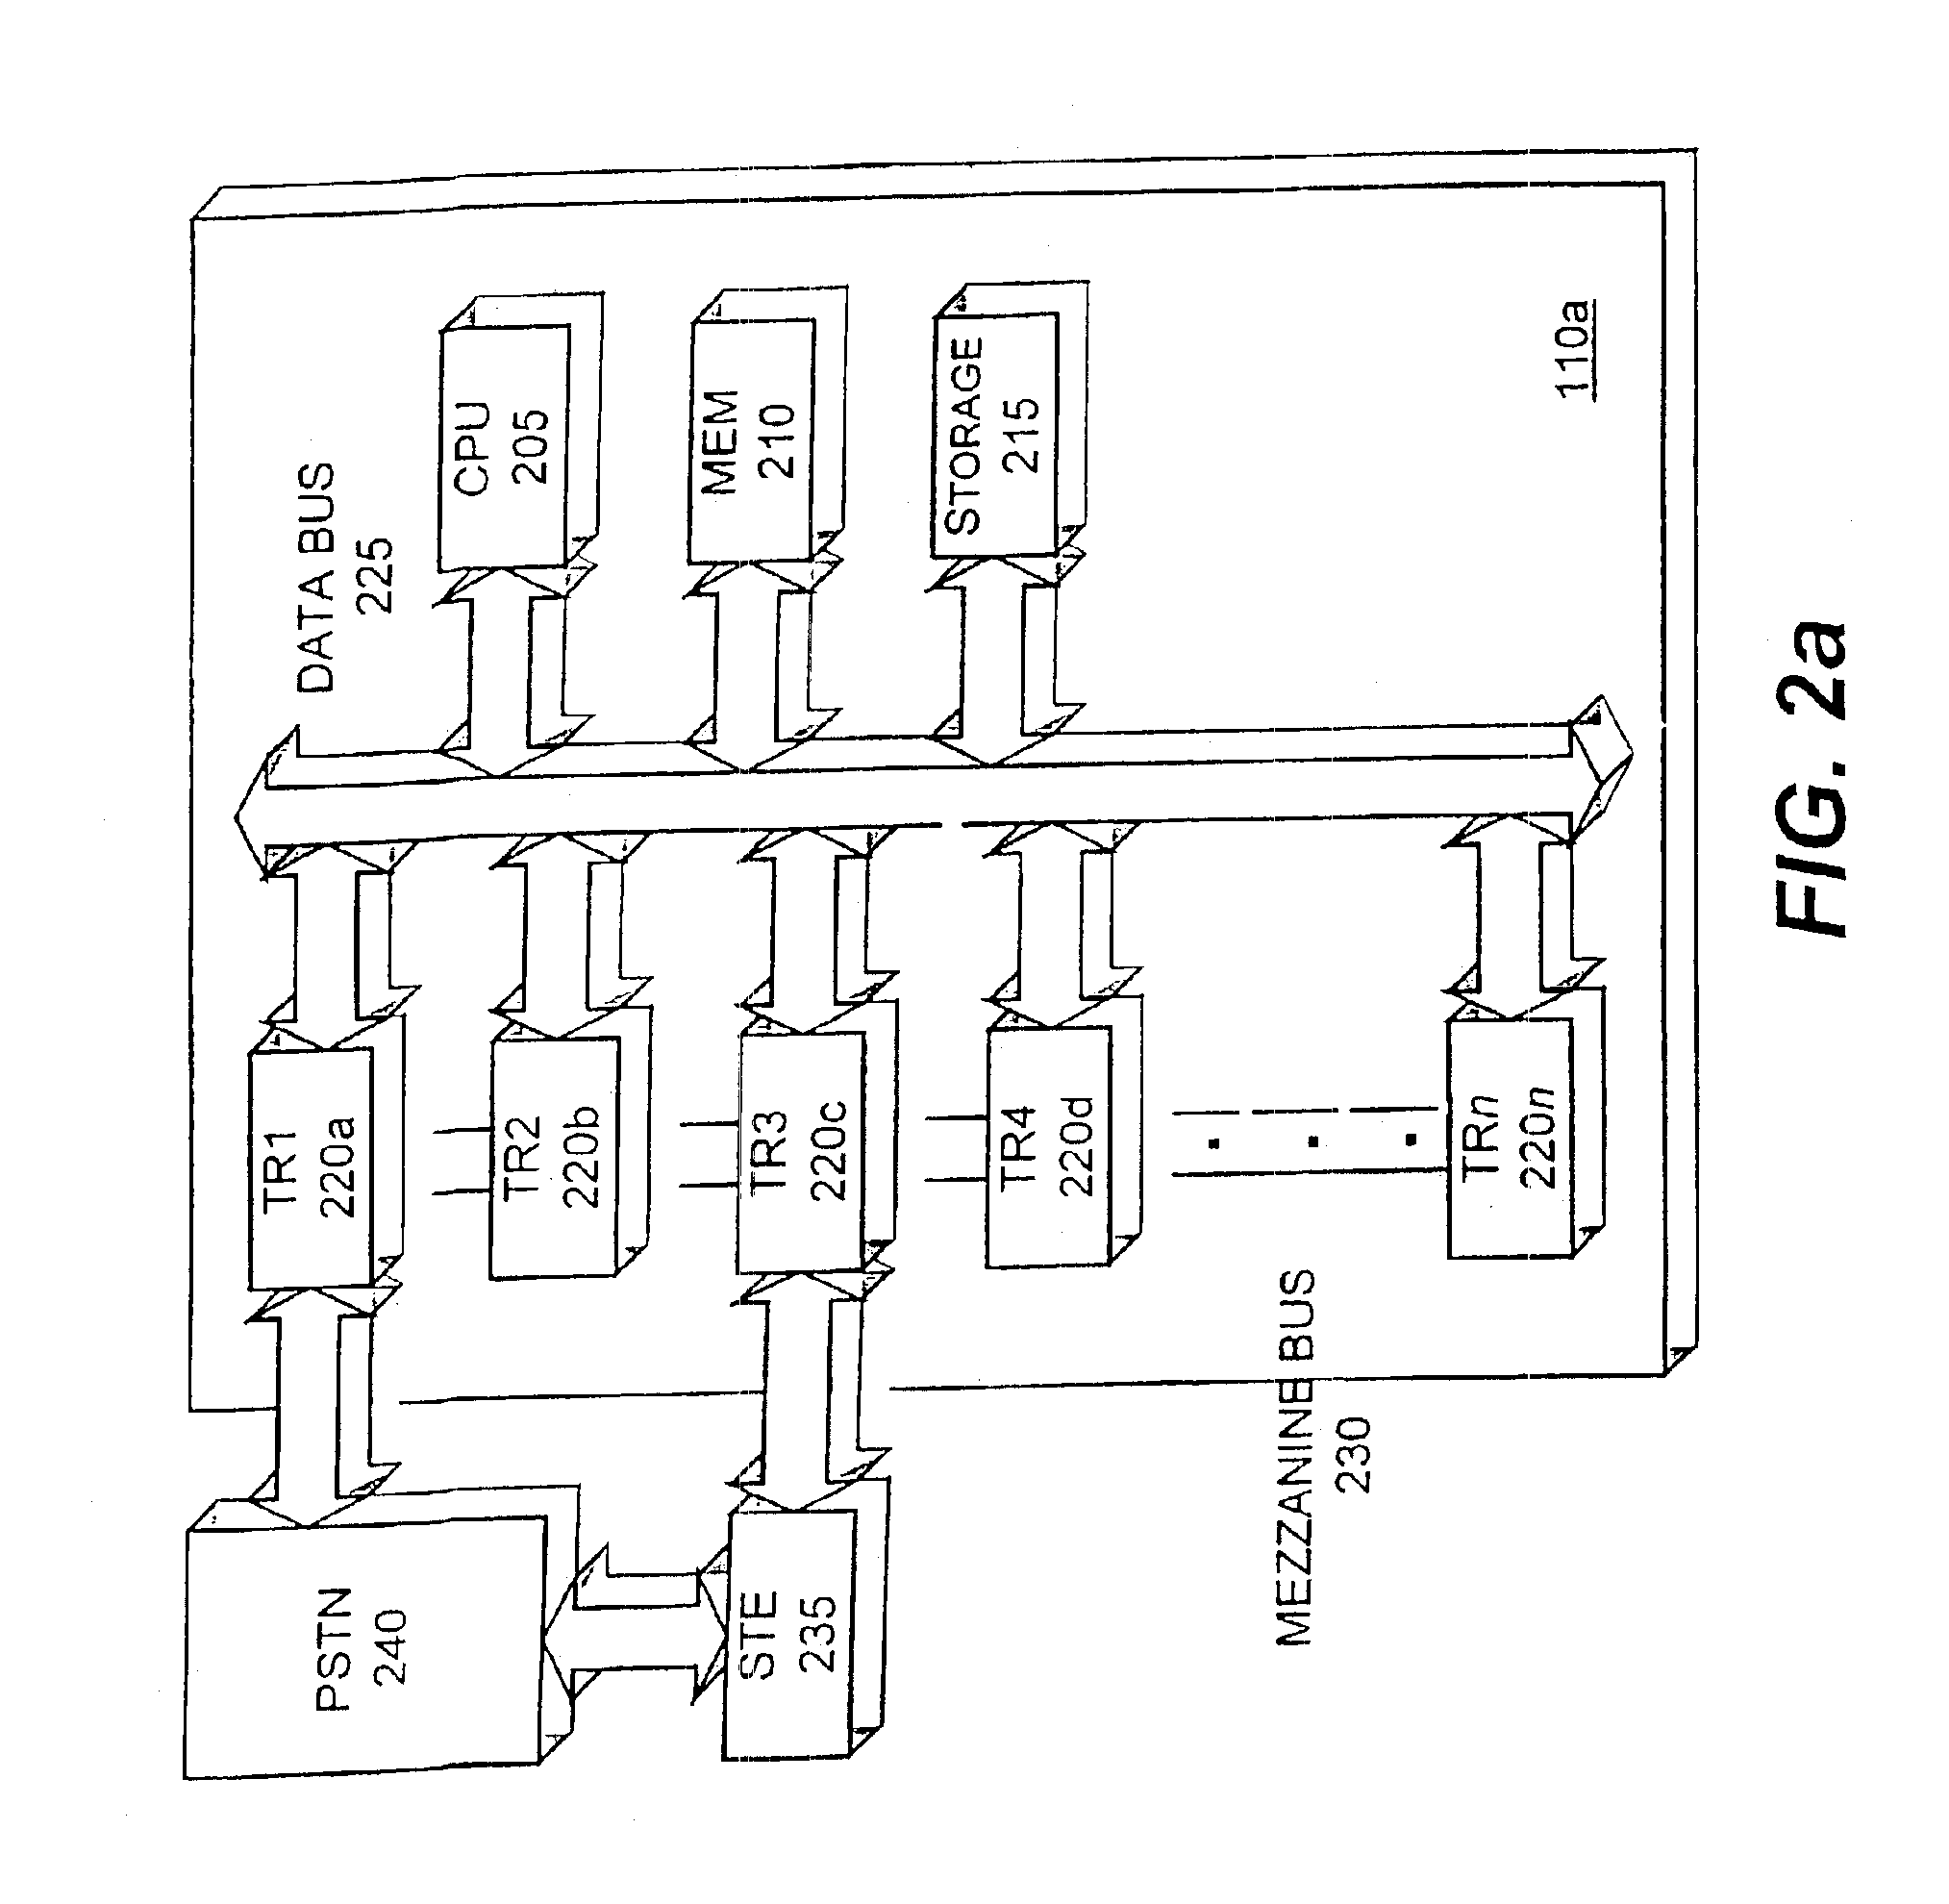 Telecommunication resource allocation system and method